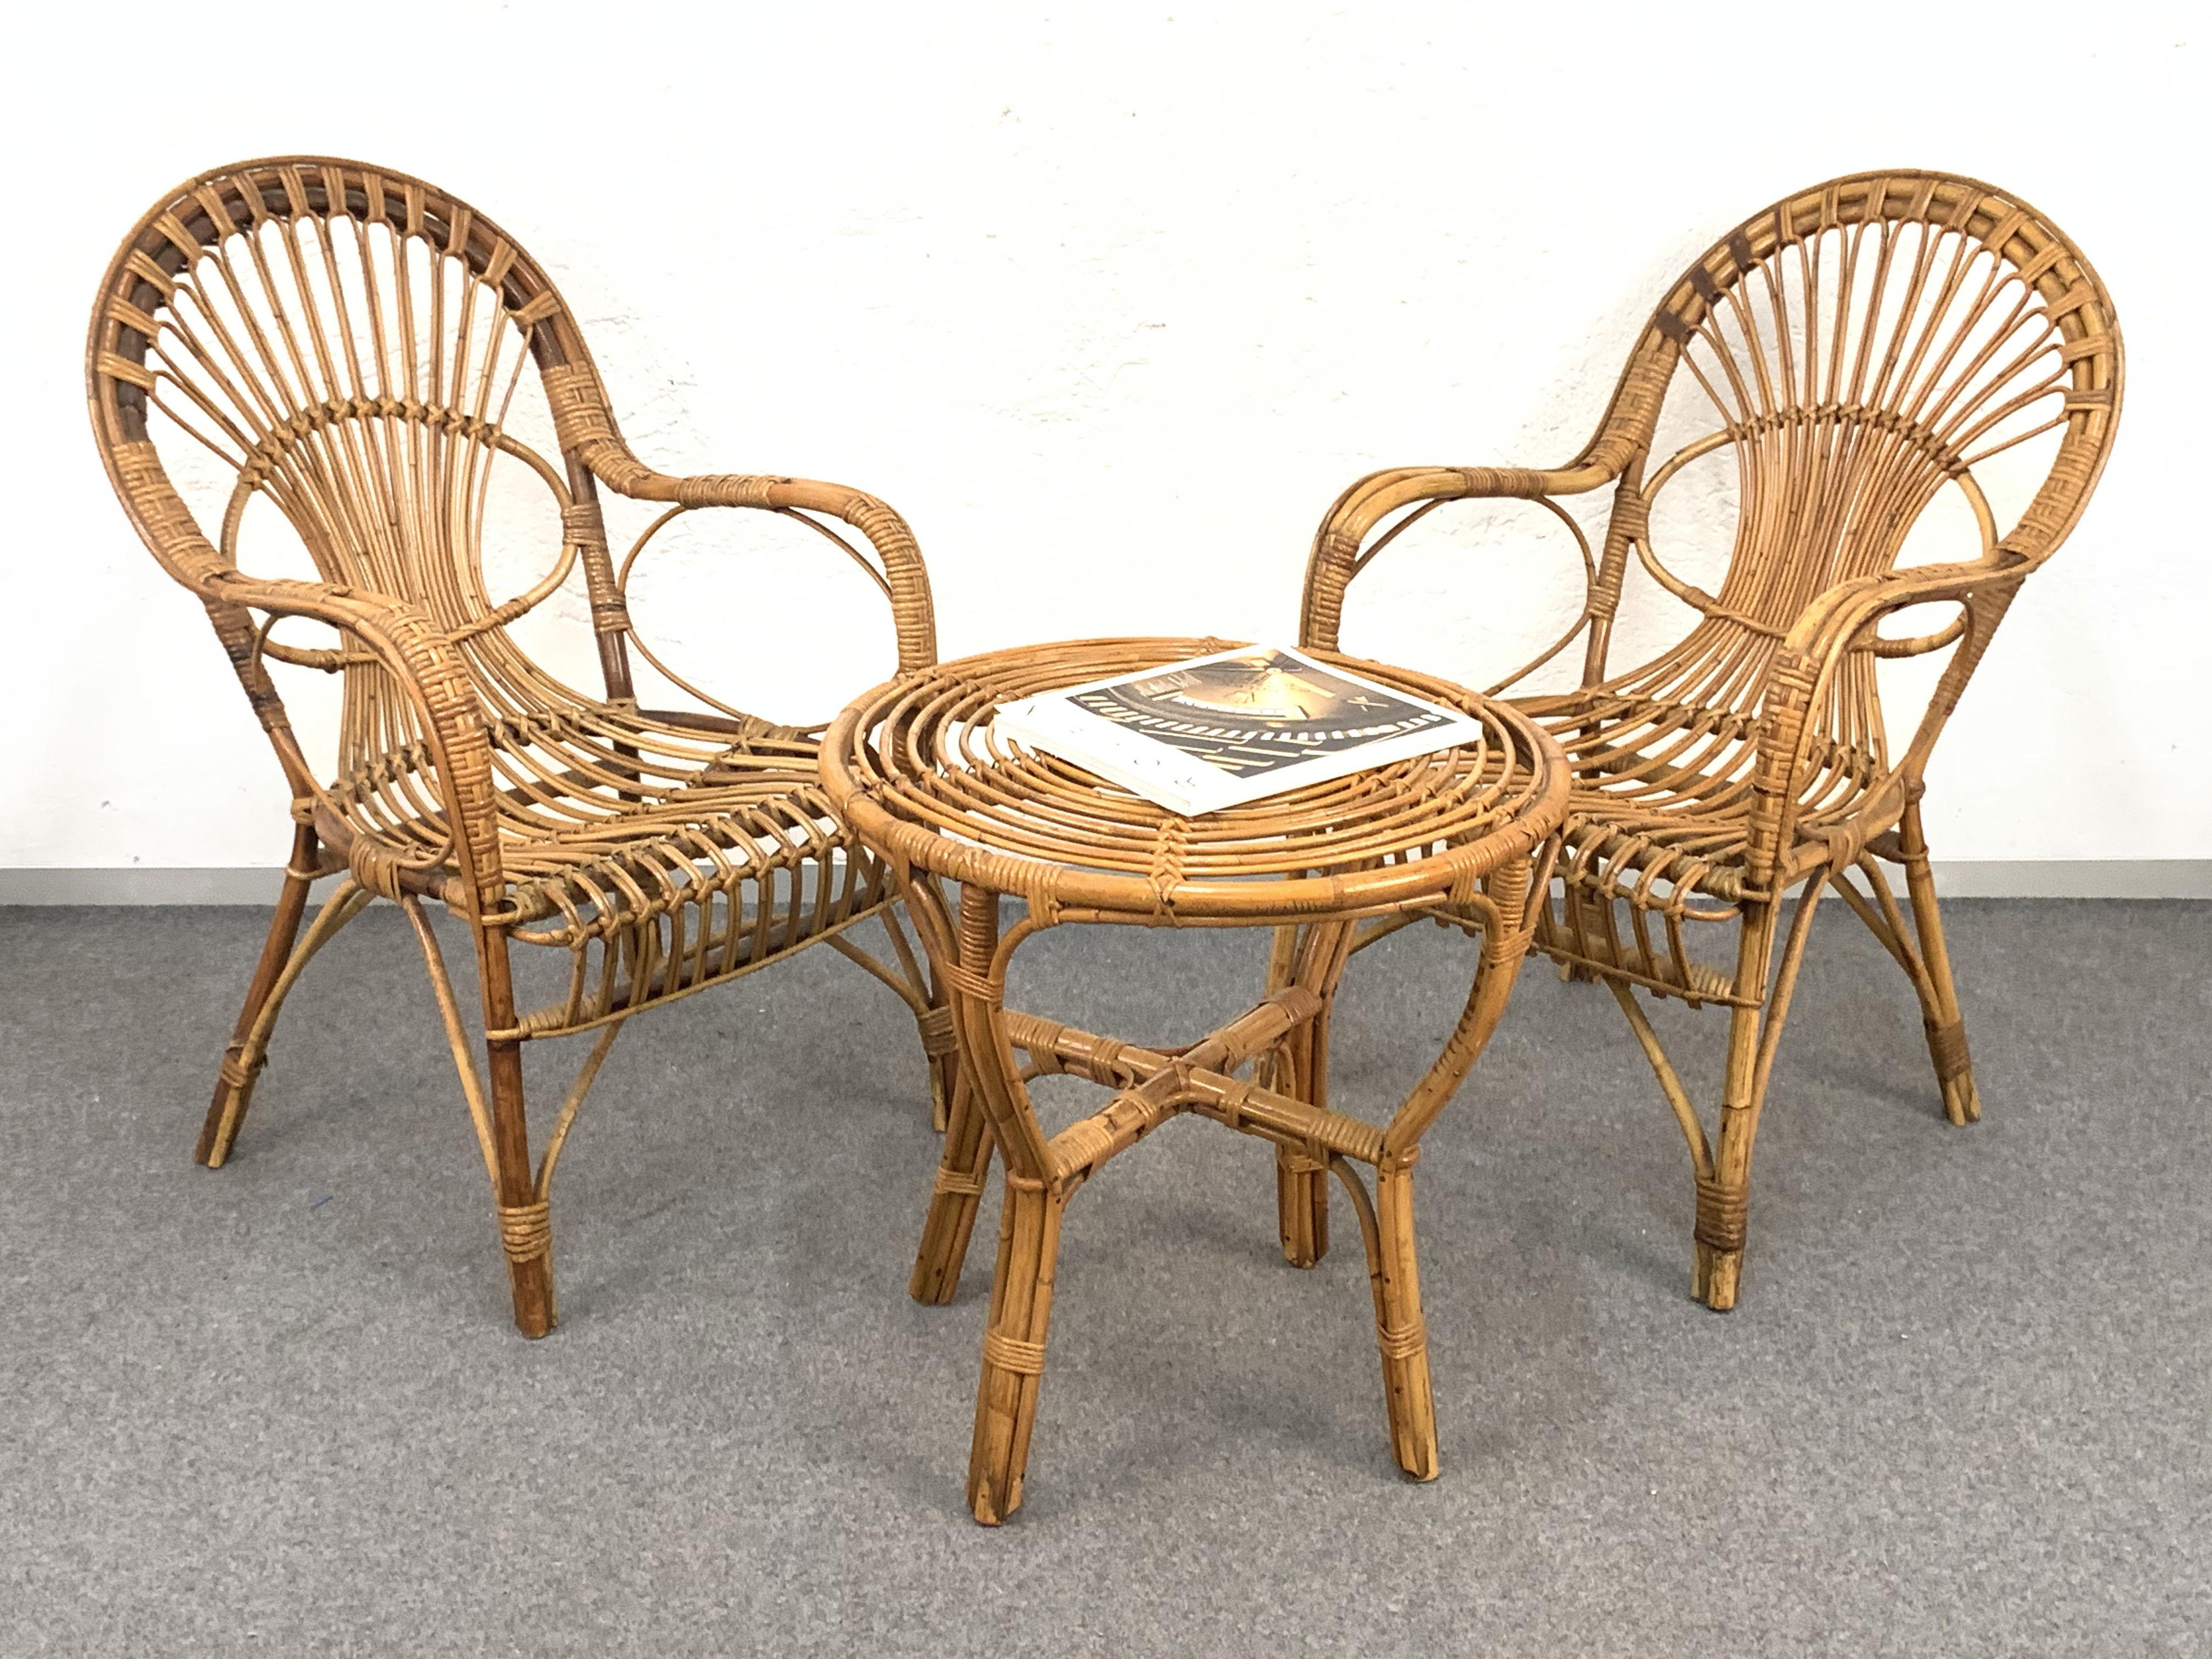 Midcentury Rattan and Bamboo Sofa, Armchairs and Italian Coffee Table, 1960s For Sale 6